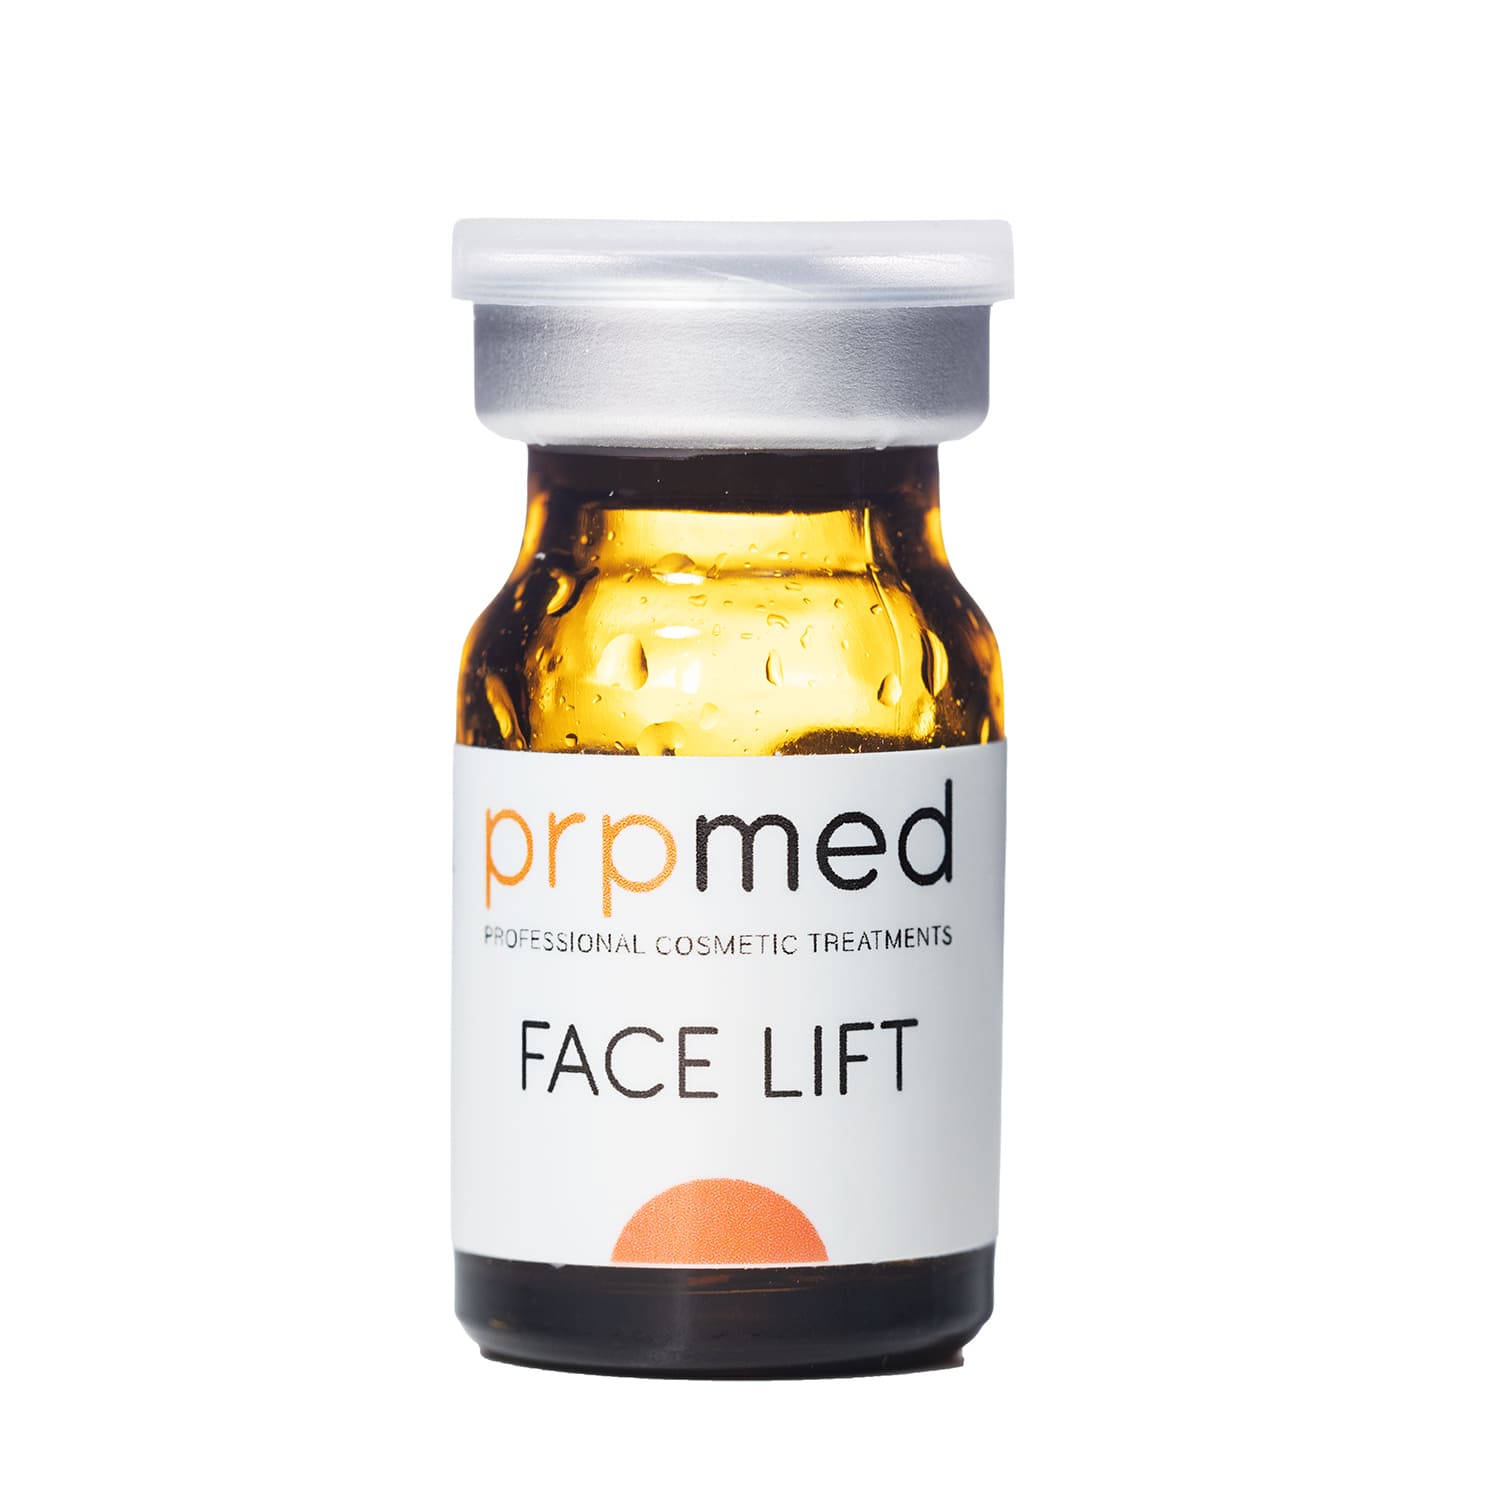 Face Lift - Microneedling Serum - The natural alternative to